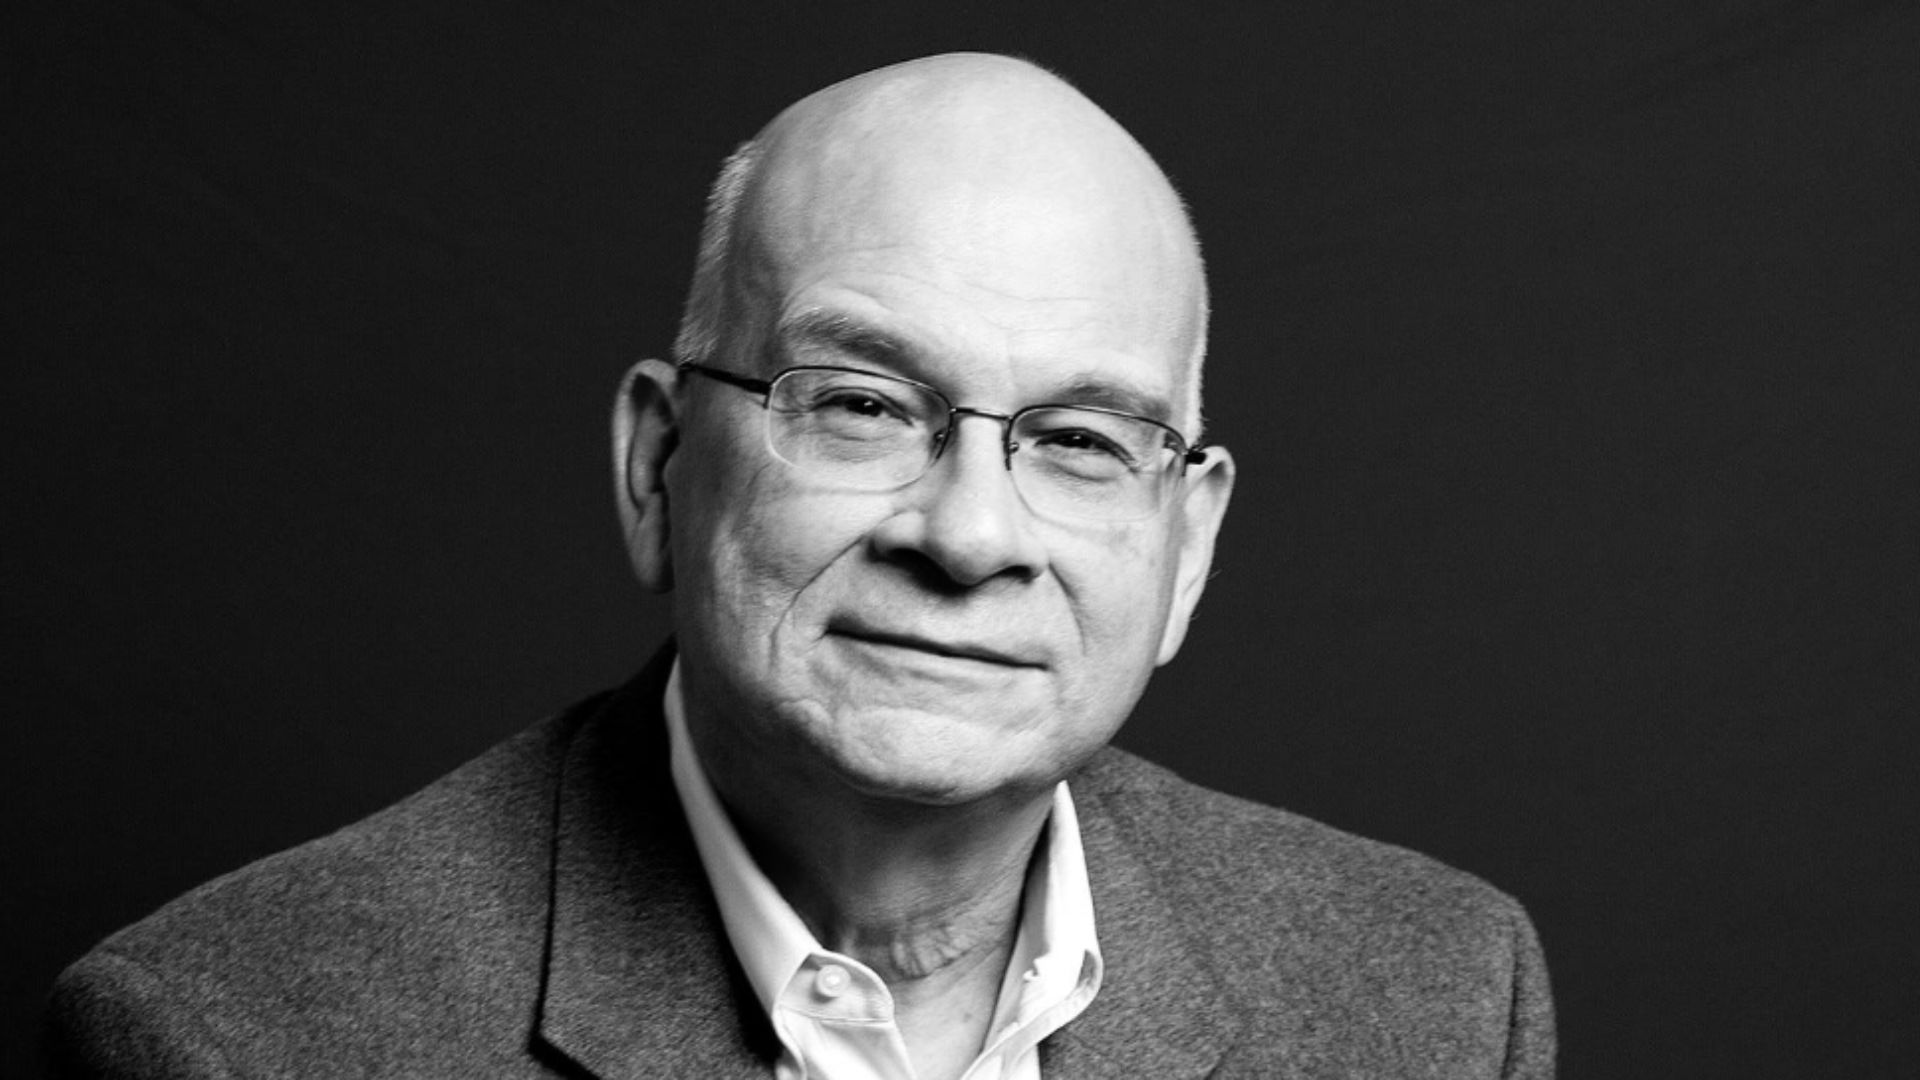 Lessons Learned from Tim Keller's Life and Ministry